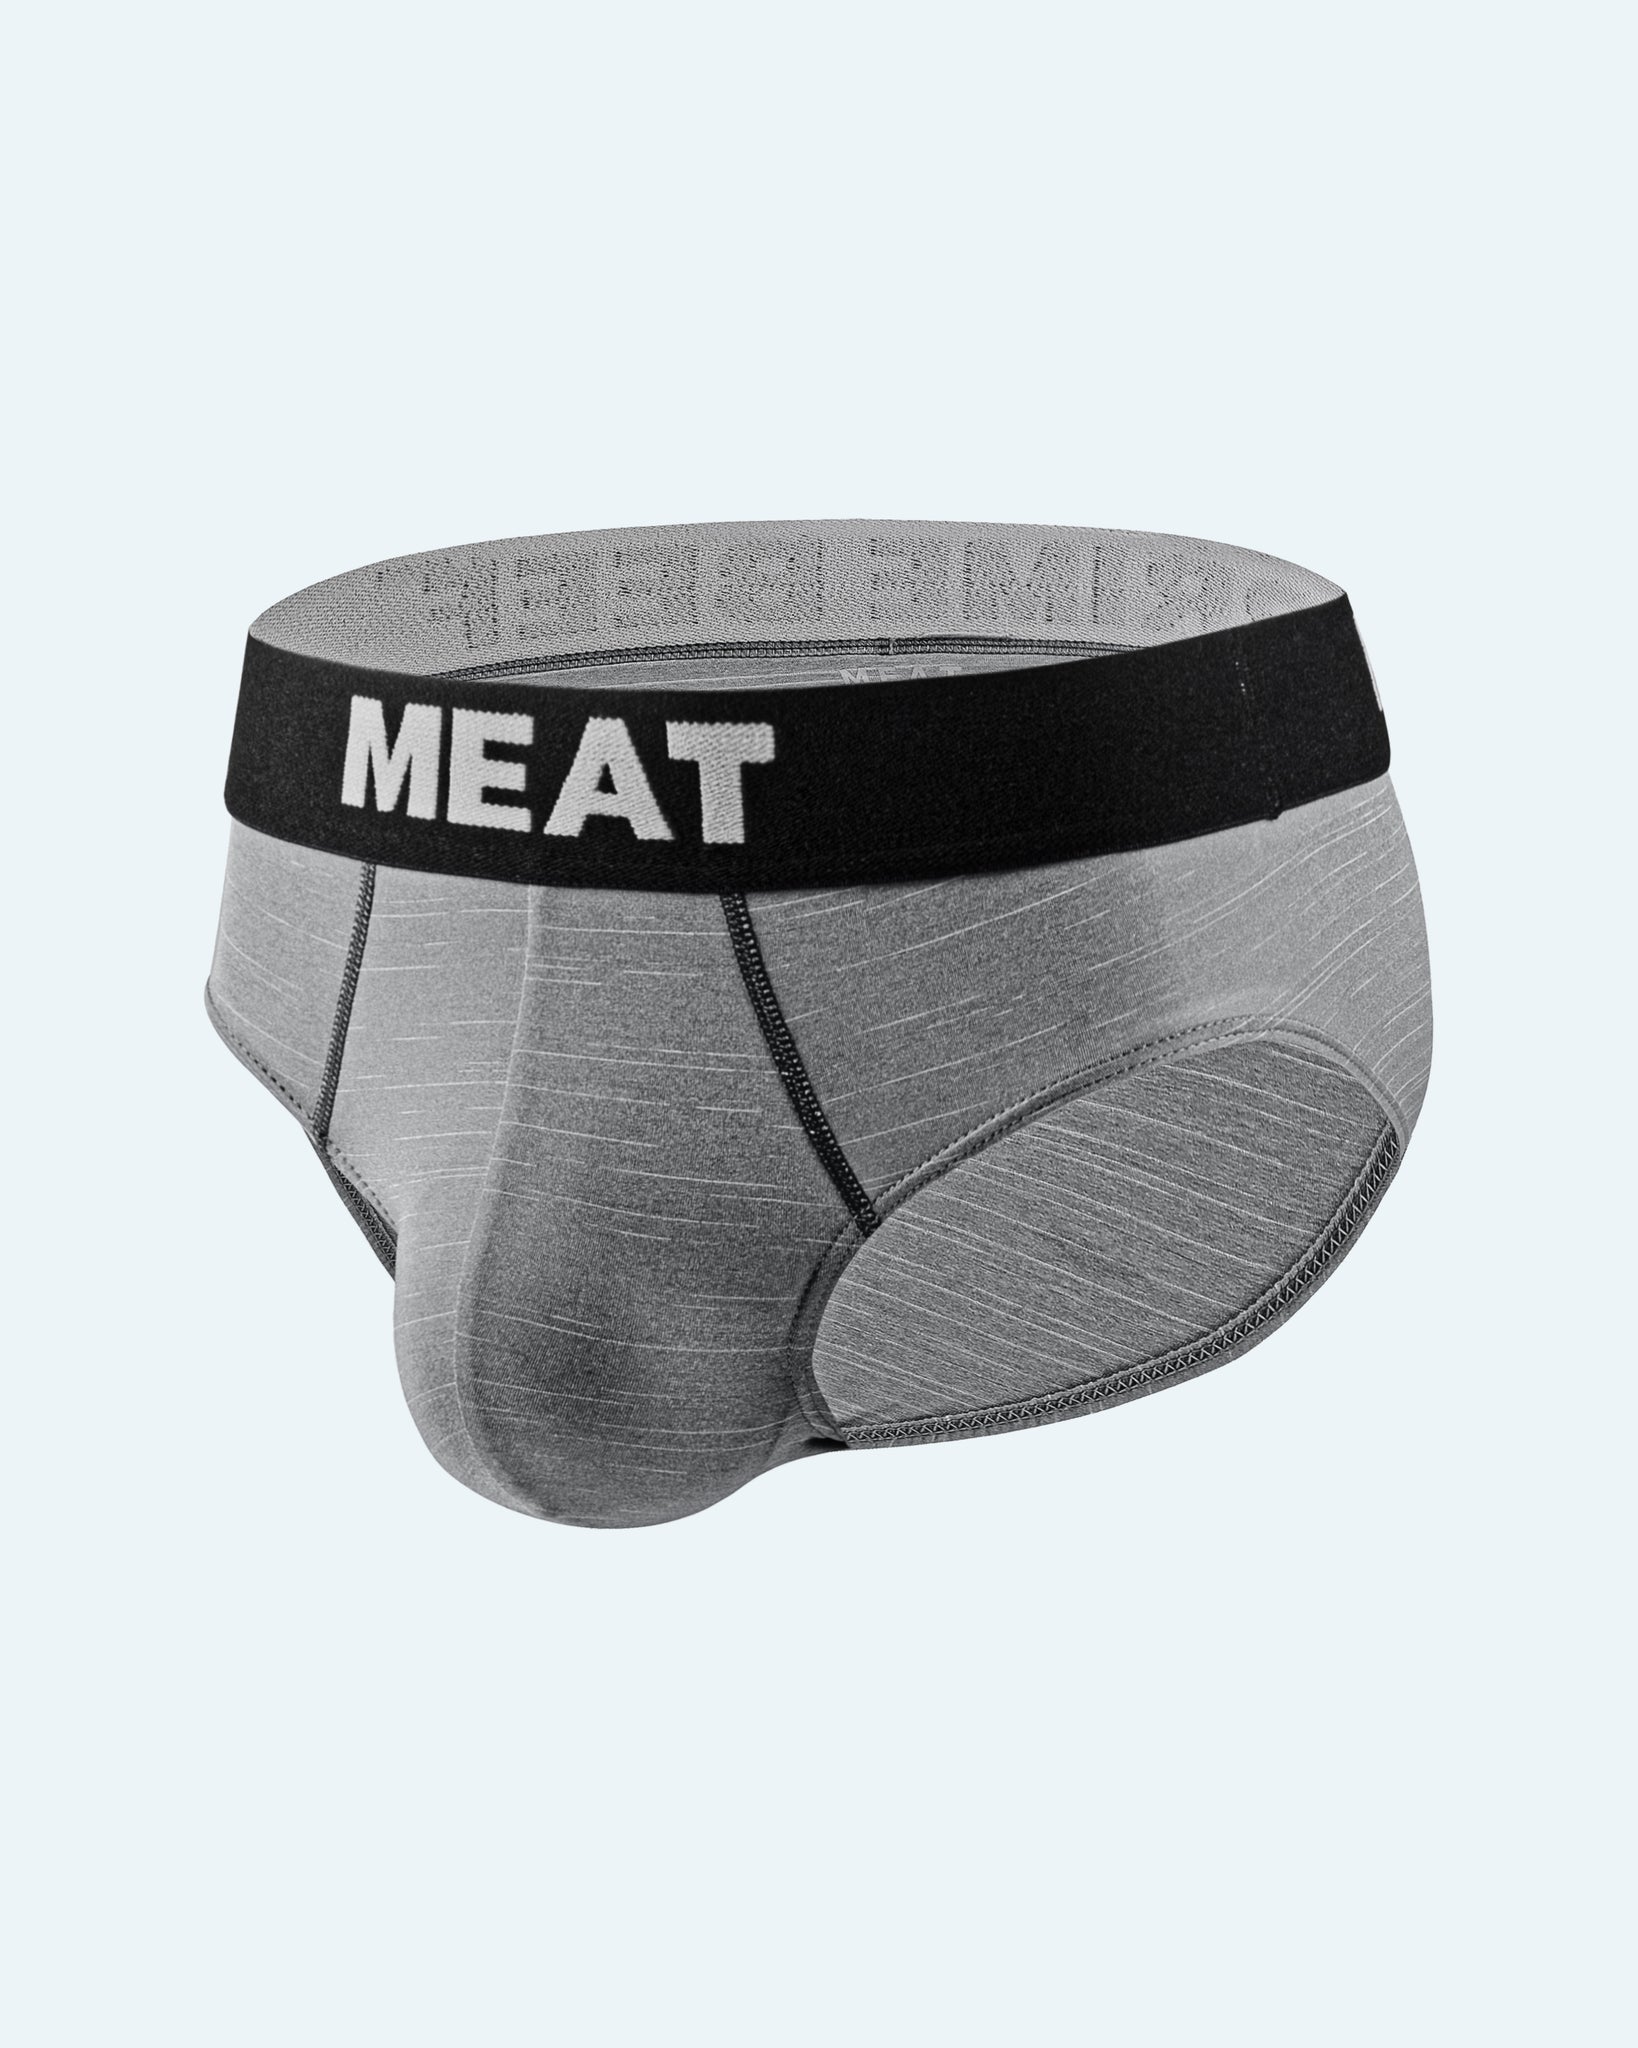 MEAT SPORTSCLUB - Intimate collection brief. Guaranteed to be the most  comfortable underwear you ever own.. . @presidentofunitedstatesoflove  showing off intimate brief. #TeamMEAT